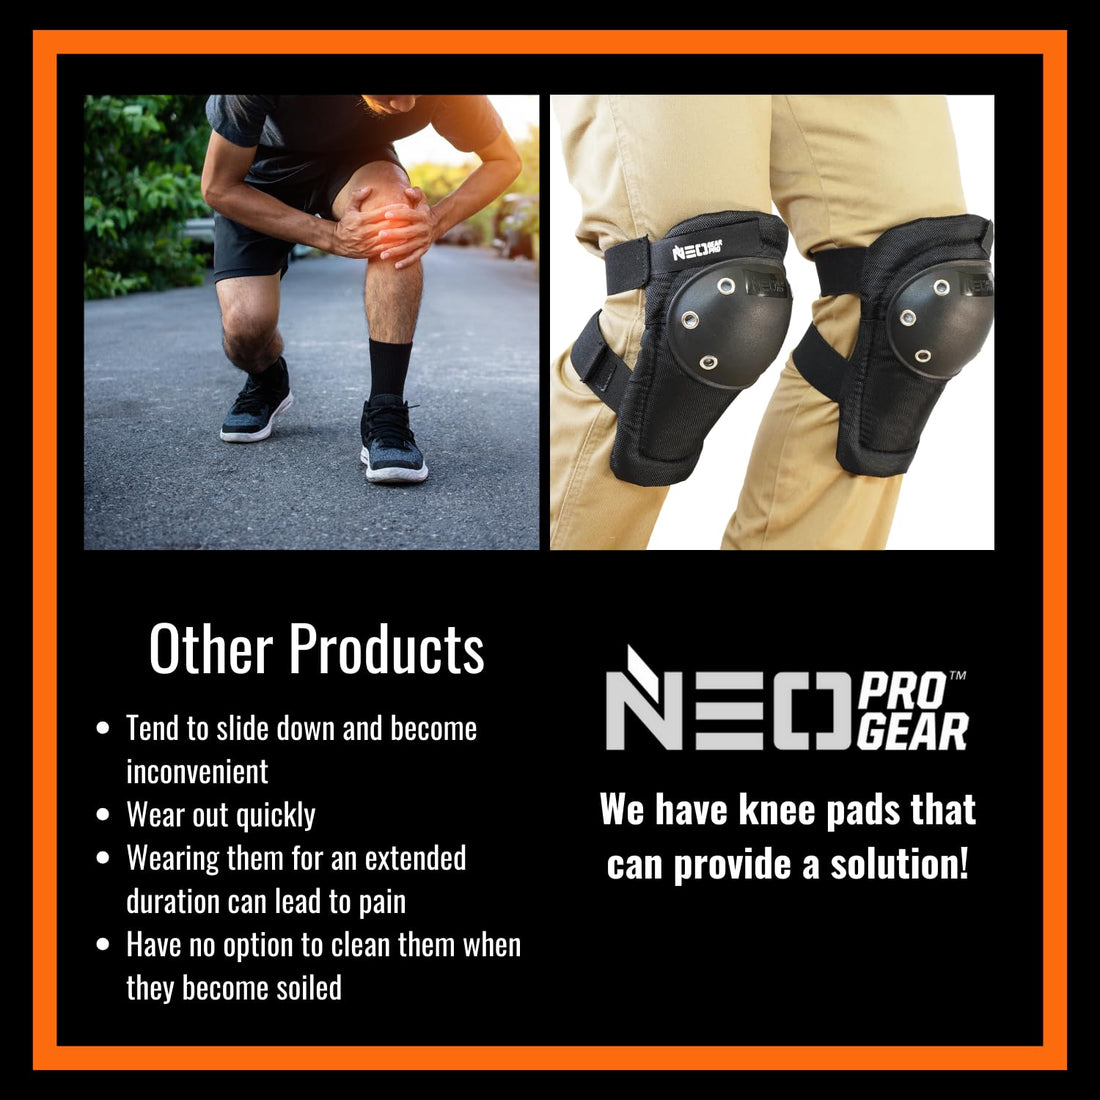 NEO GEAR PRO Hard Kneepad for Work Construction and Gardening